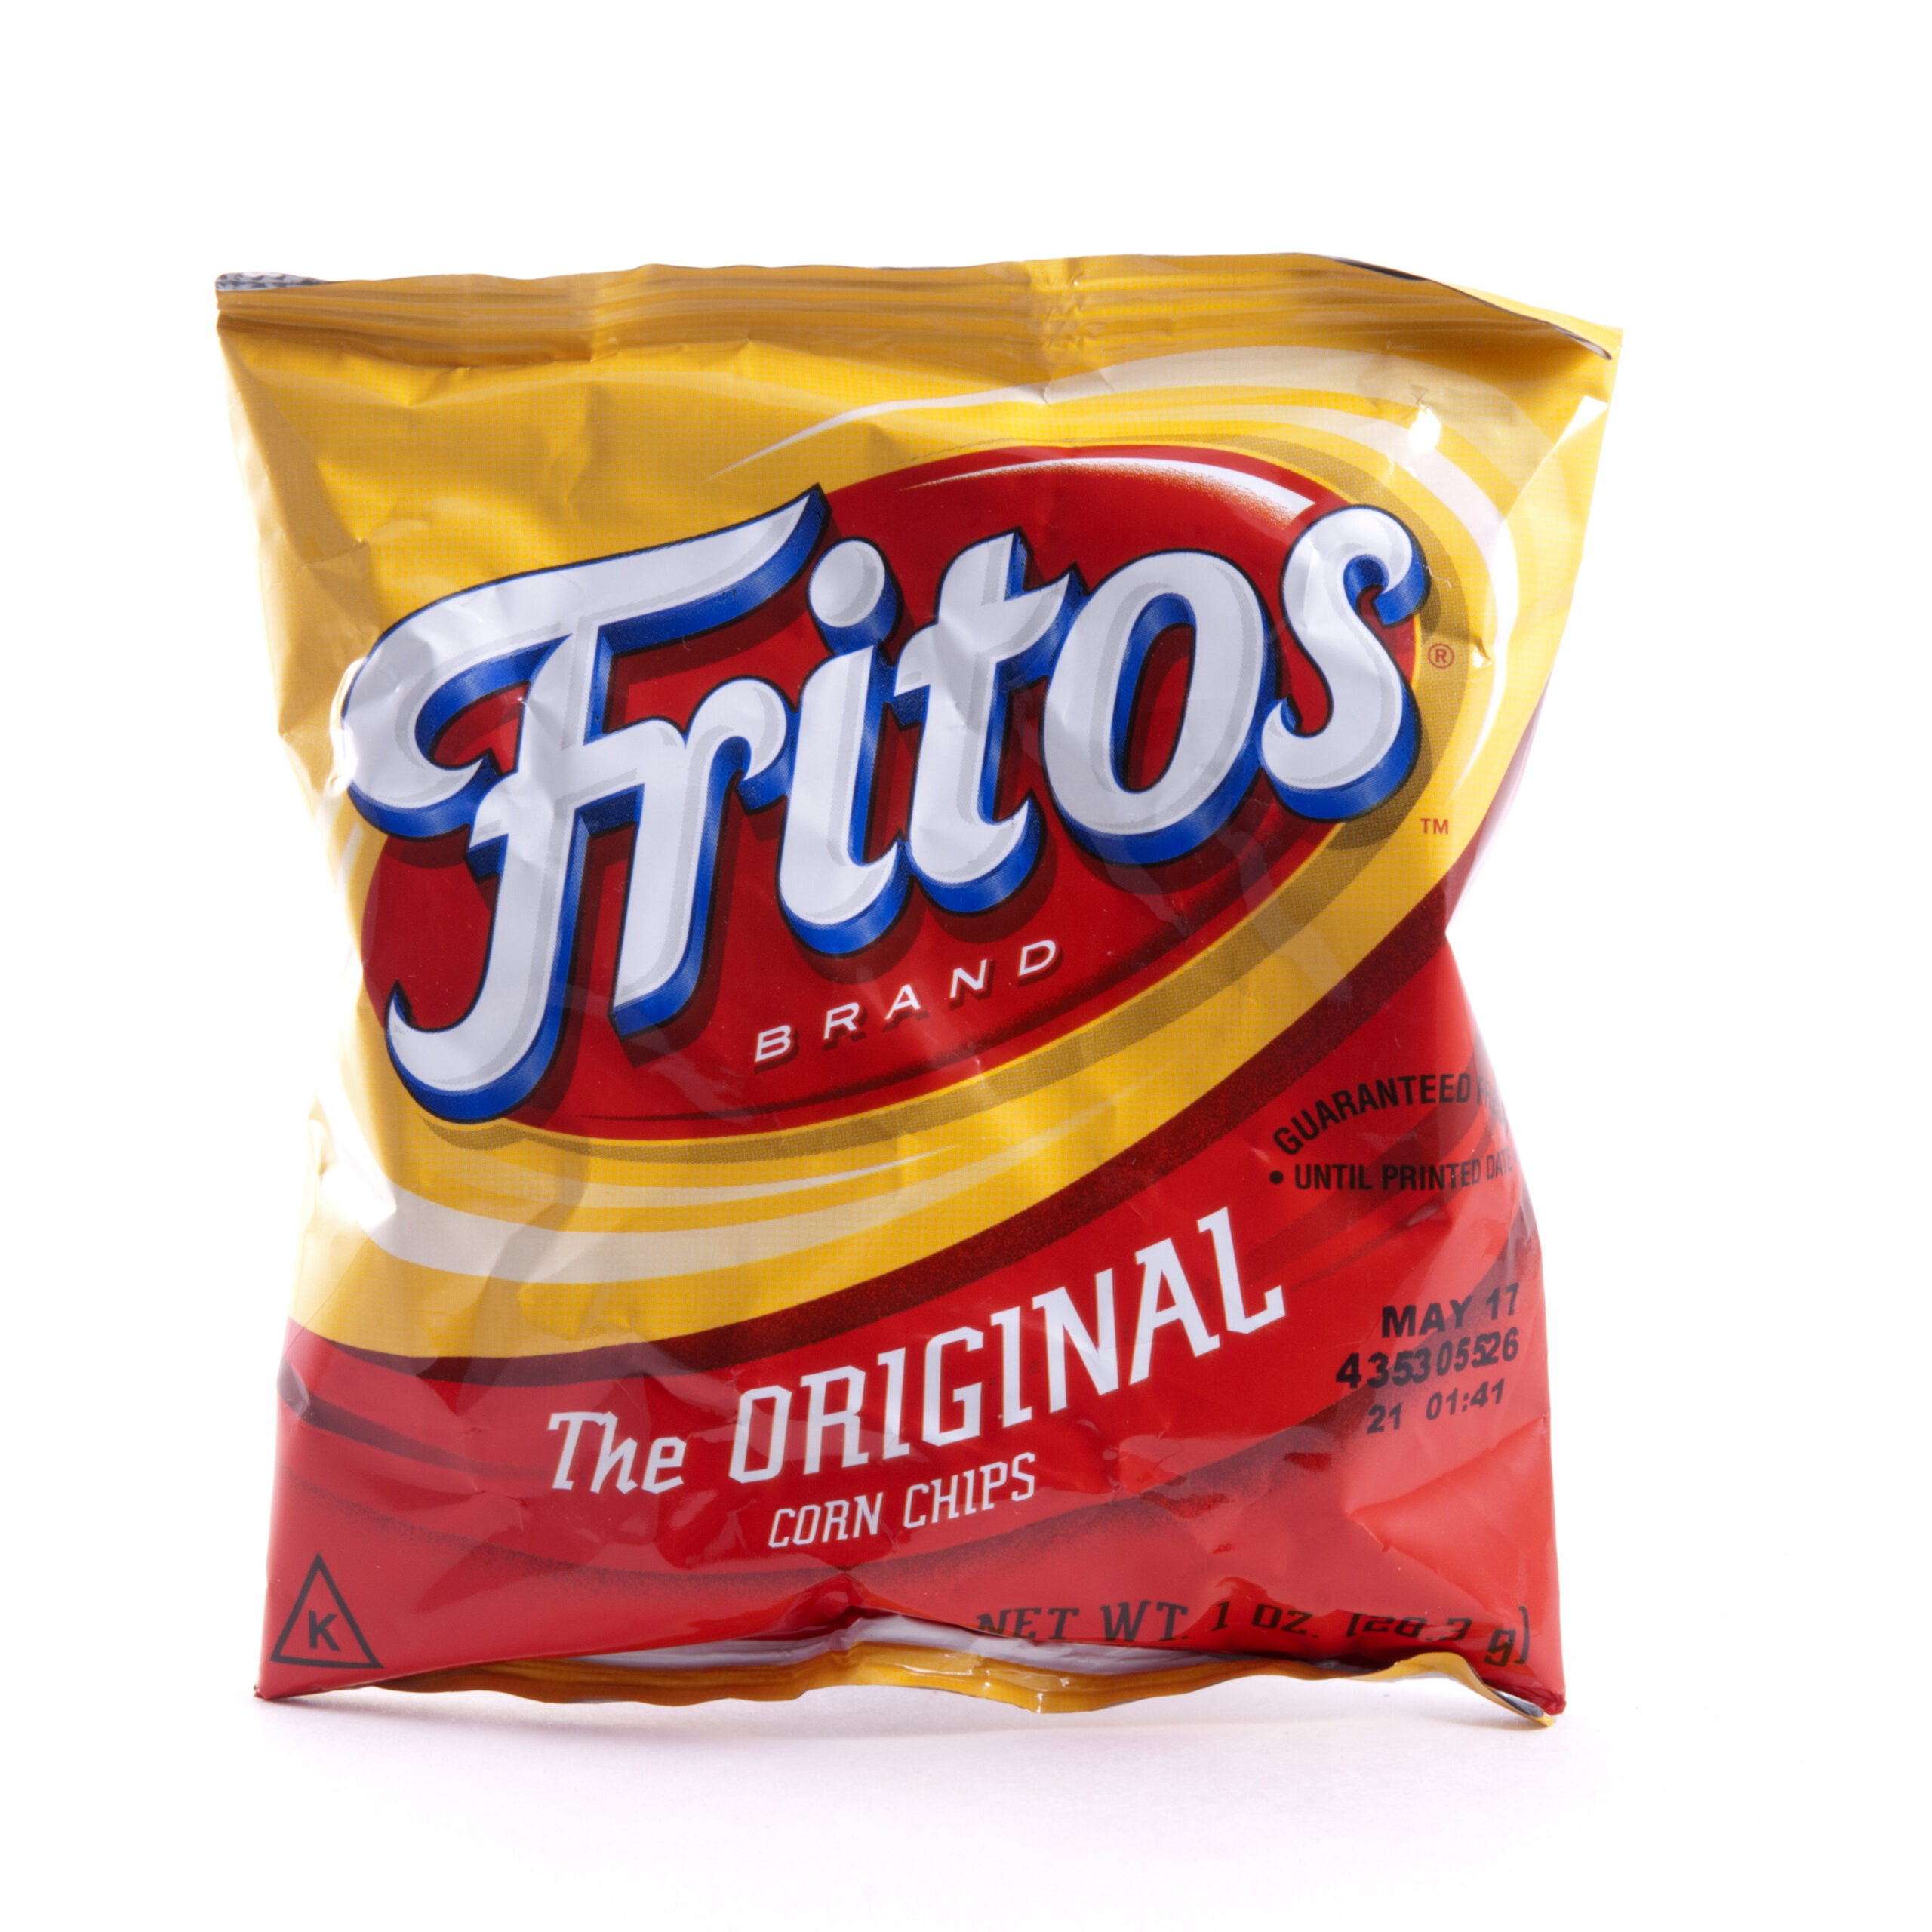 Atlanta, USA - February 11, 2012: A single serving bag of Fritos brand corn chips. Fritos are manufactured by the Frito-Lay company.